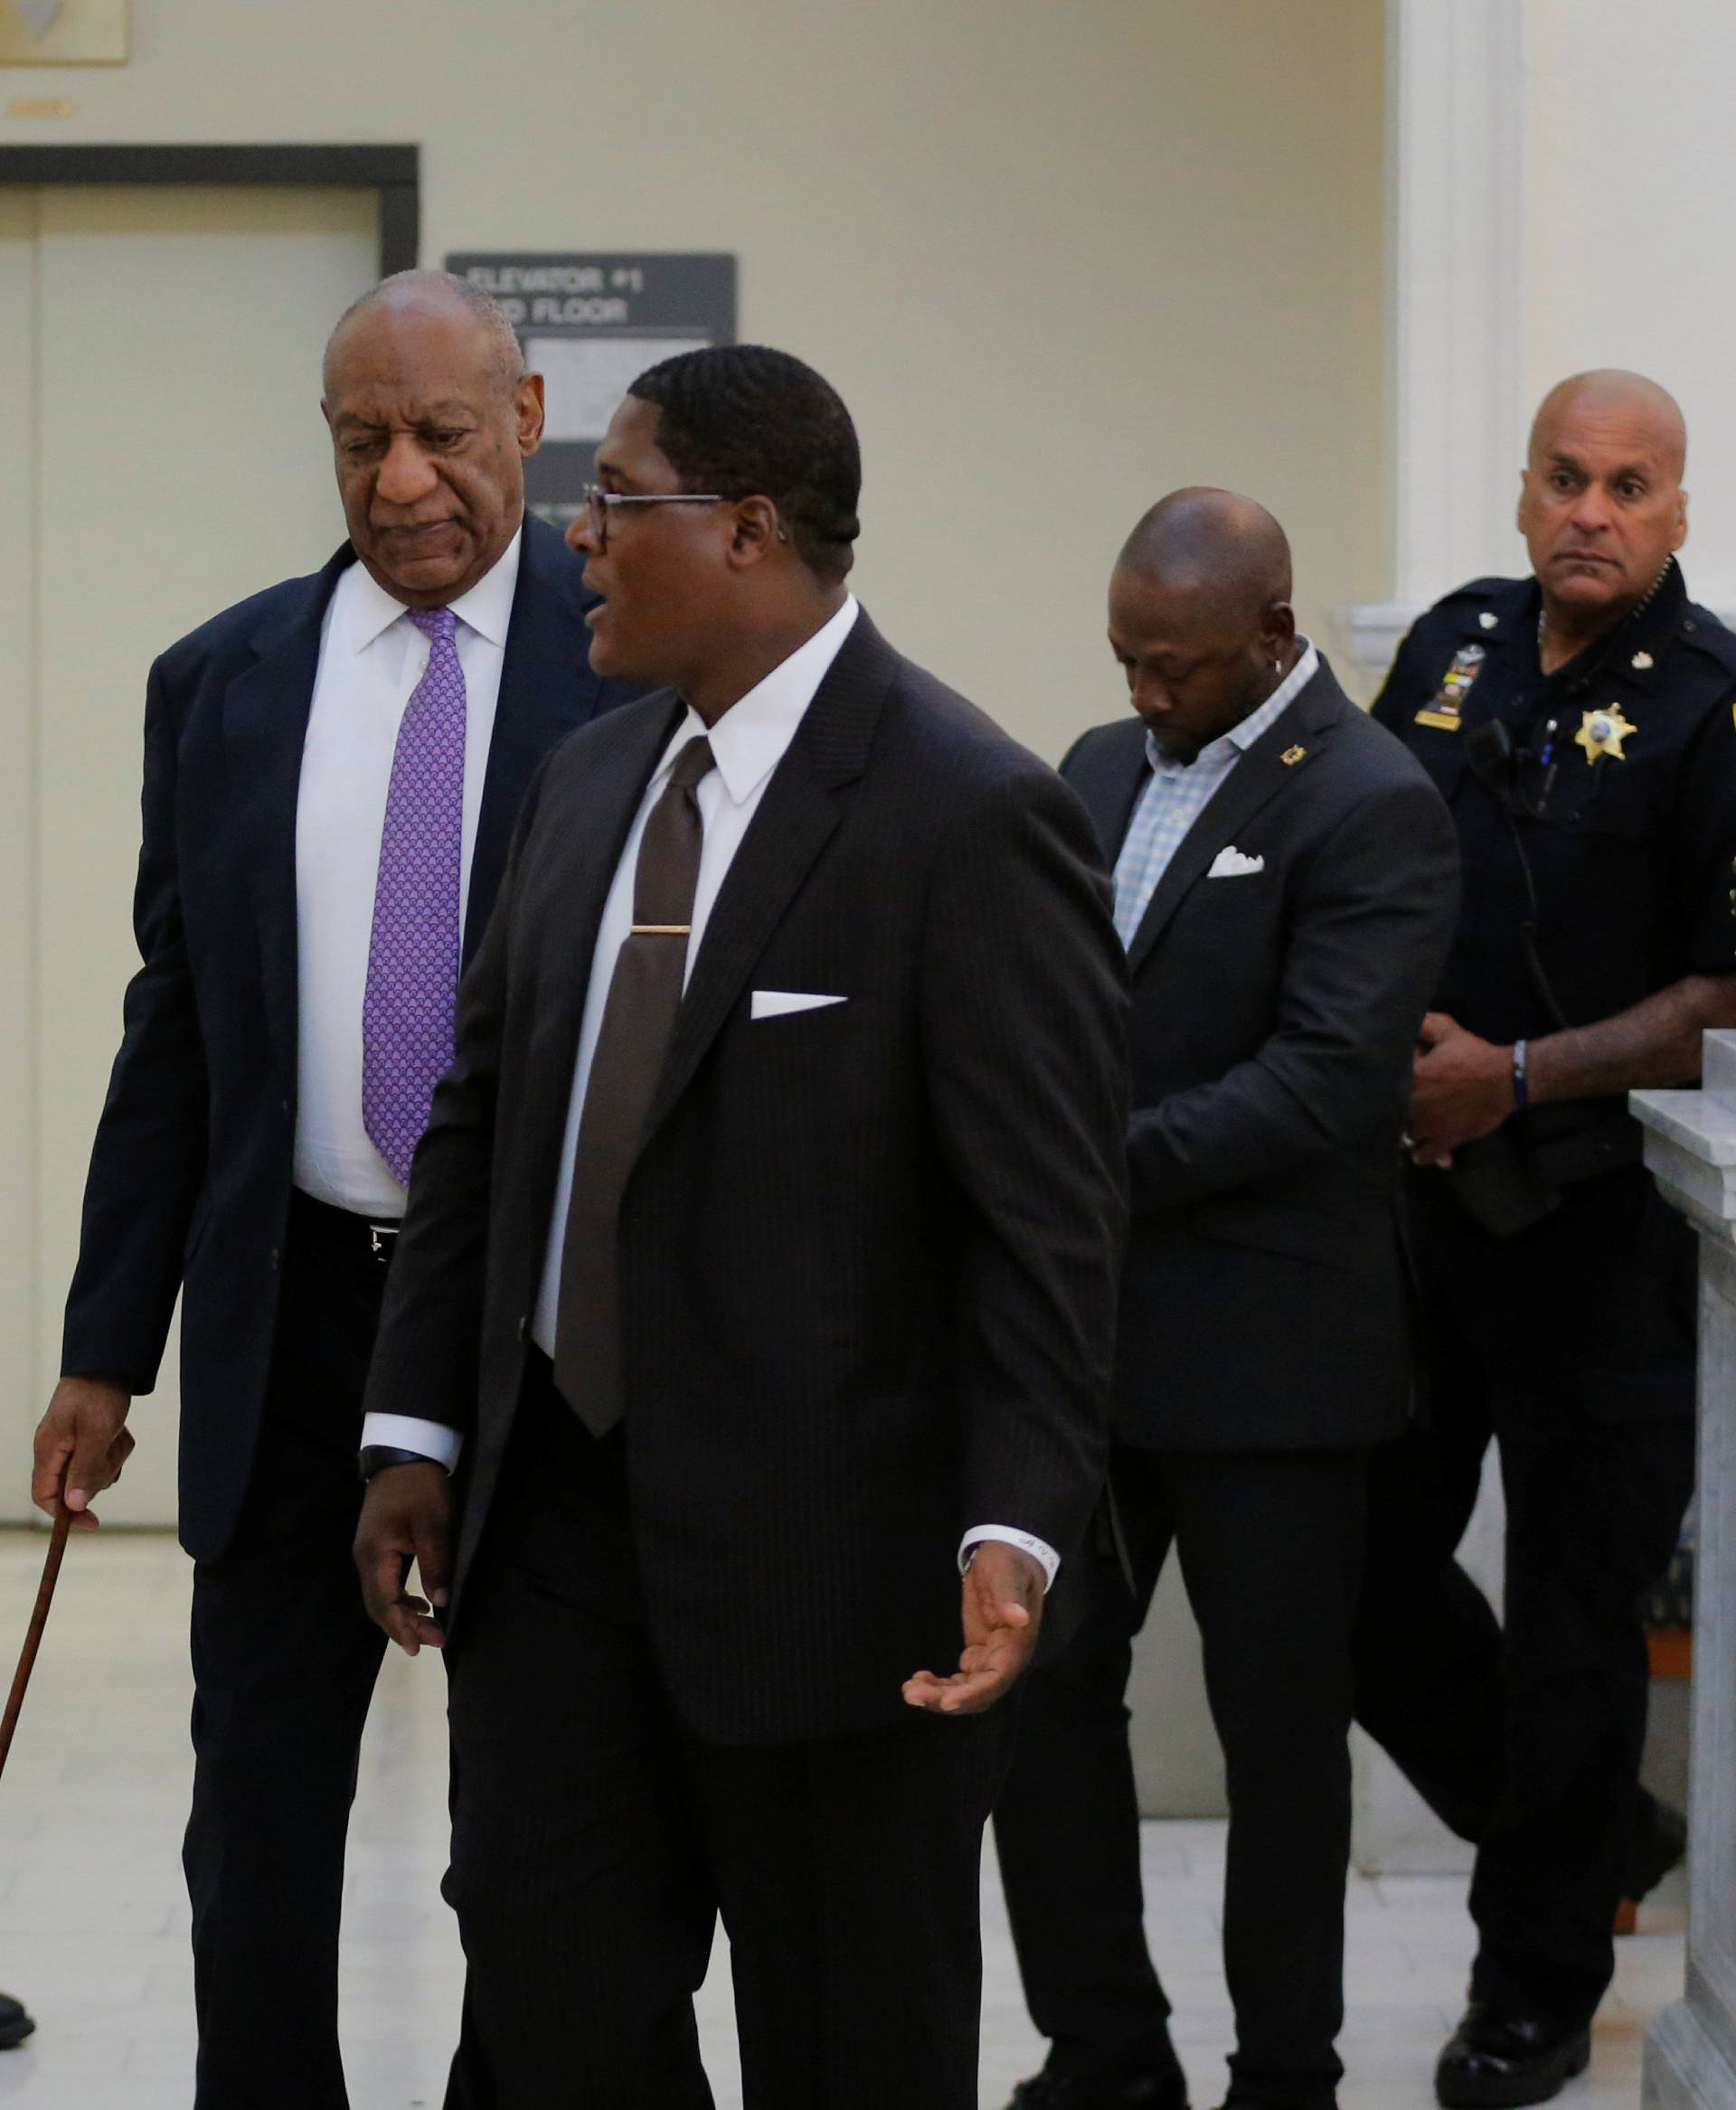 Cosby walks back into the courtroom after trial break in Norristown